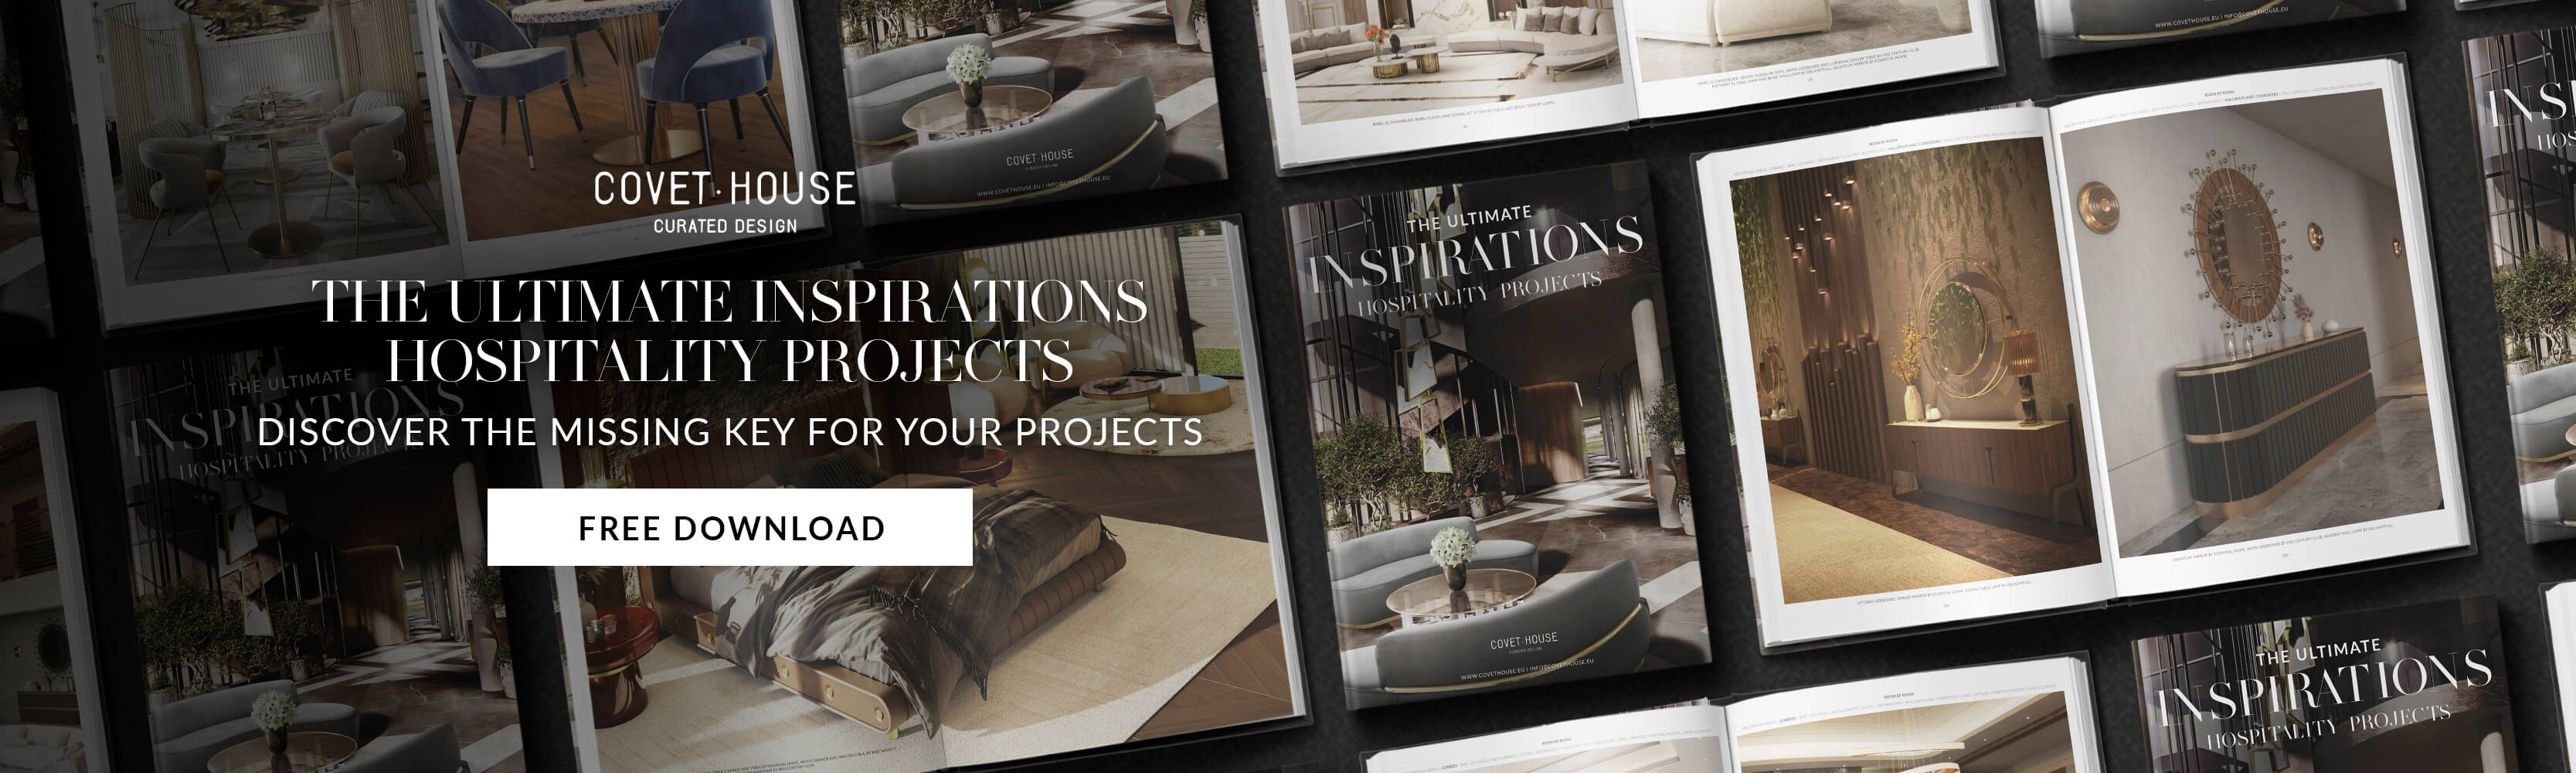 Inspirations Hospitality Projects